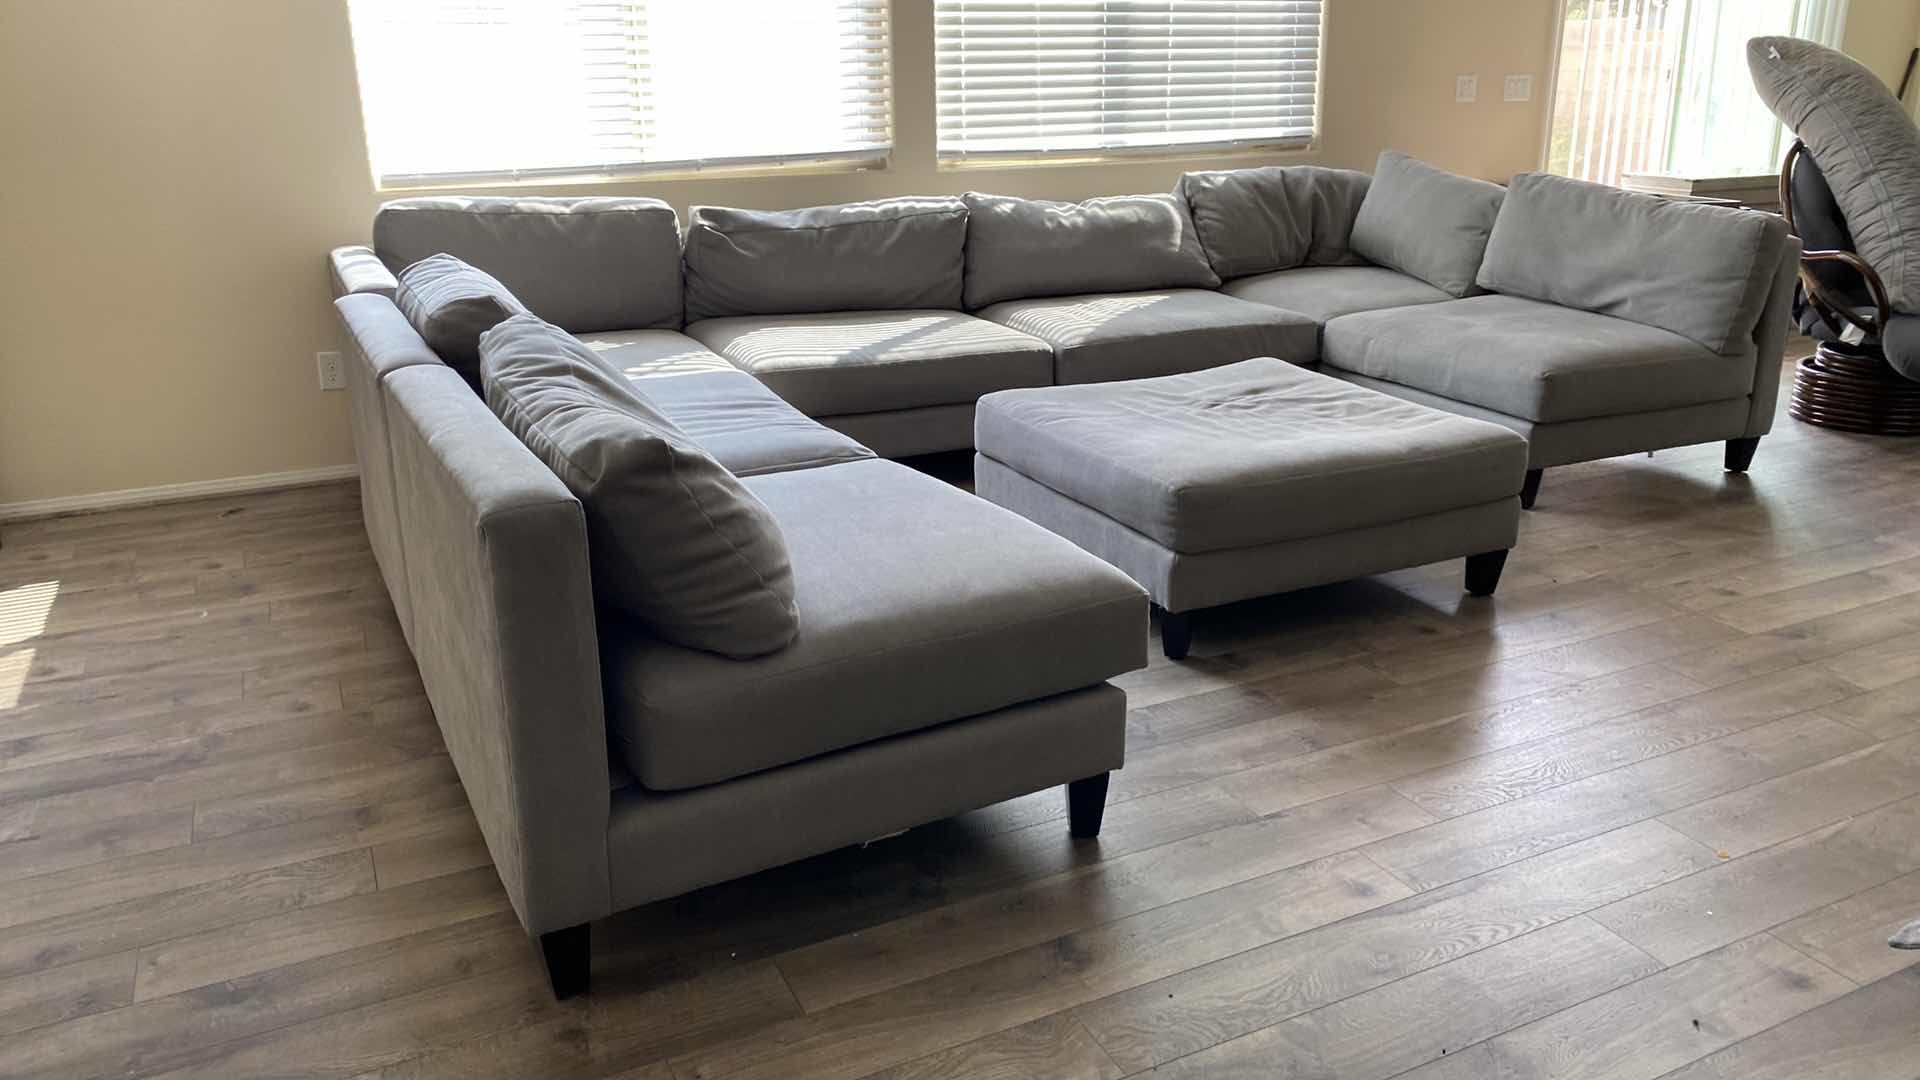 Photo 2 of 7 PIECE SECTIONAL GRAY FABRIC SOFA, CAN BE ARRANGED MULTIPLE WAYS EACH PIECE 40” x 40” H 30”, FABRIC COCKTAIL TABLE 40 1/2” x 40 1/2”